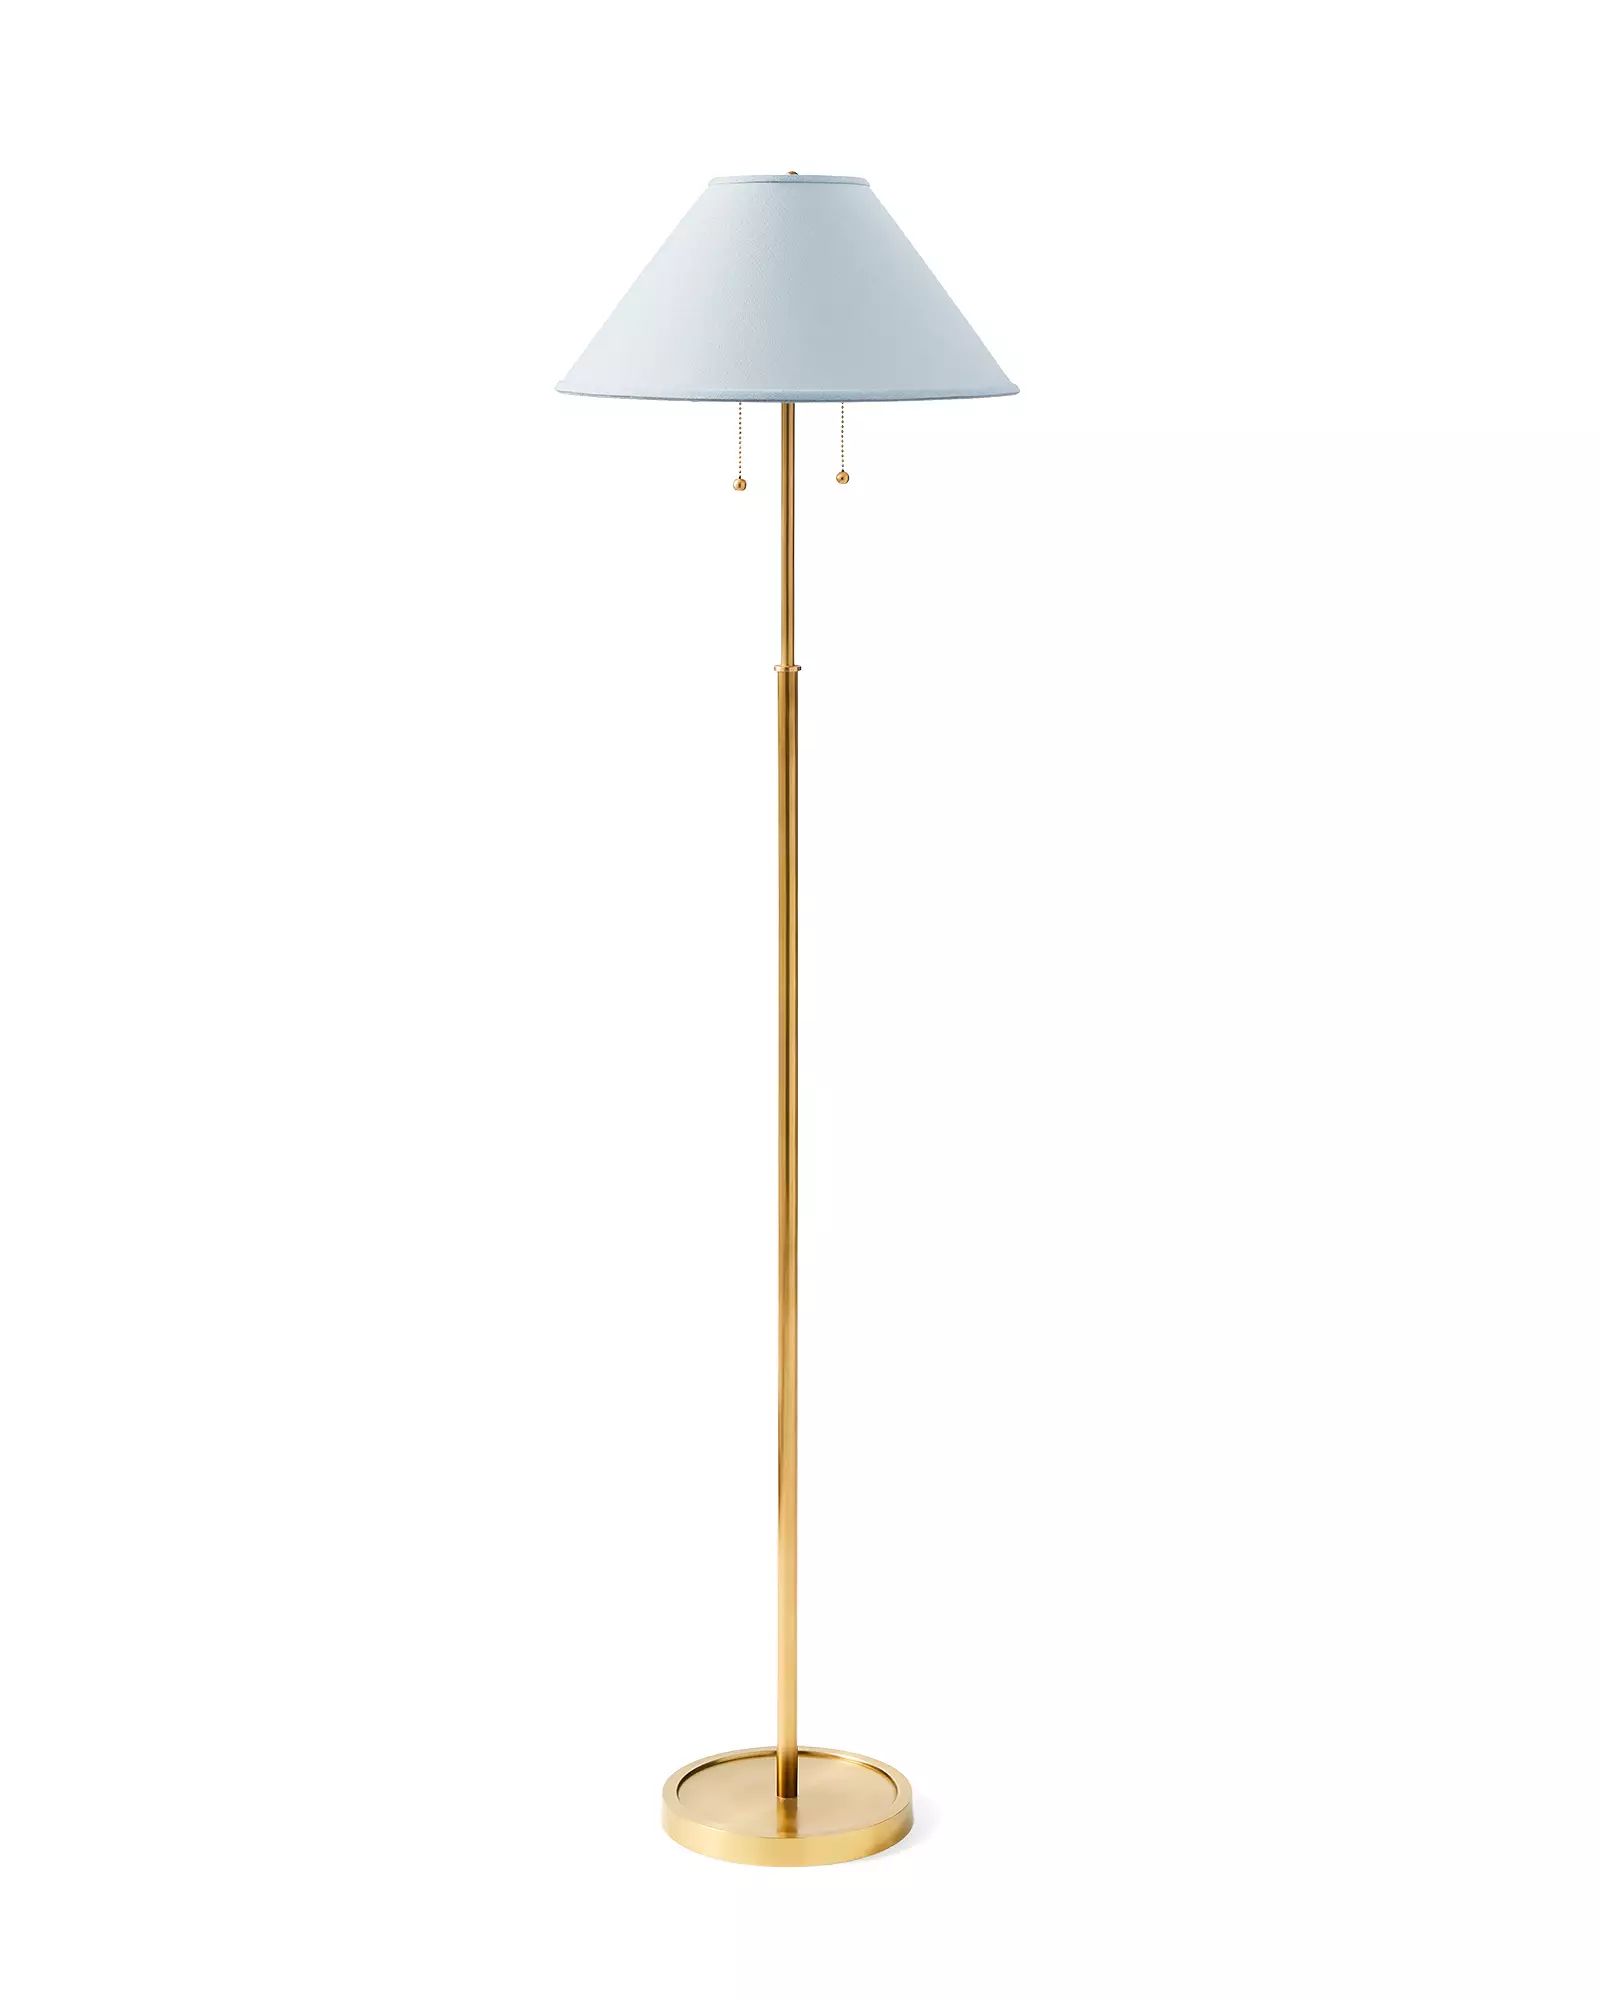 Brookings Floor Lamp | Serena and Lily